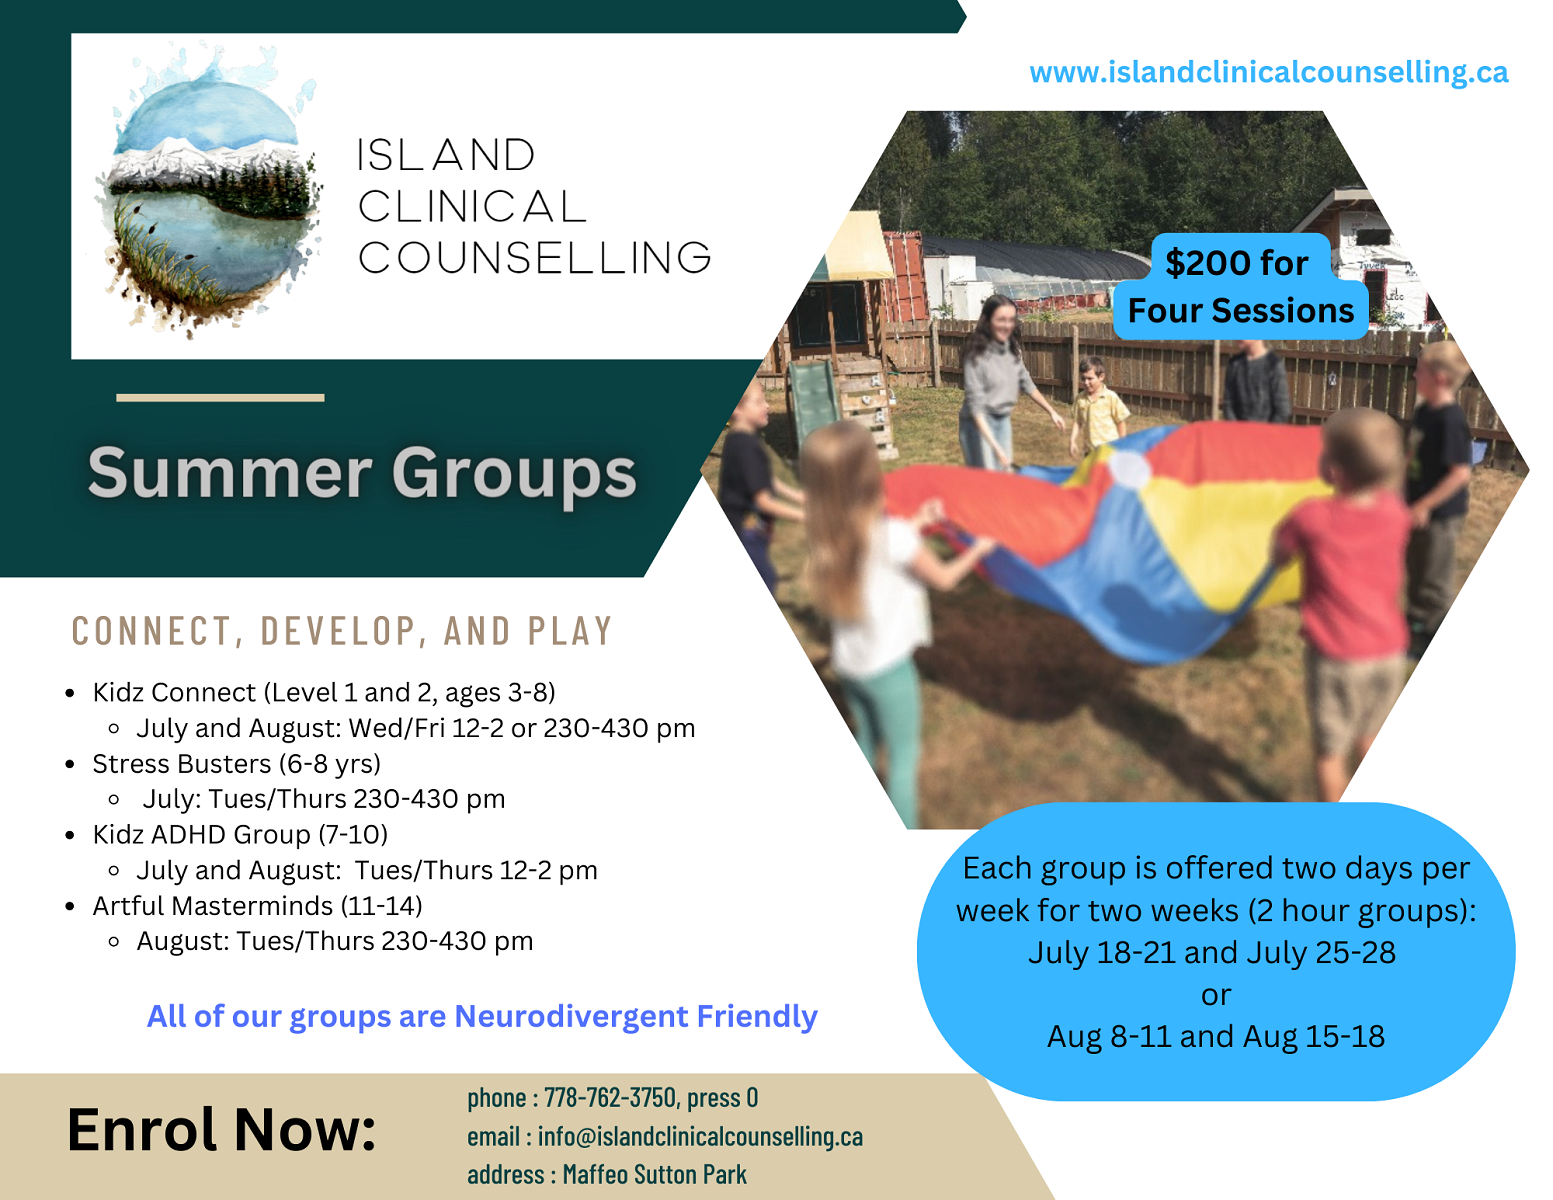 Summer Groups at Island Clinical Counselling (Nanaimo)